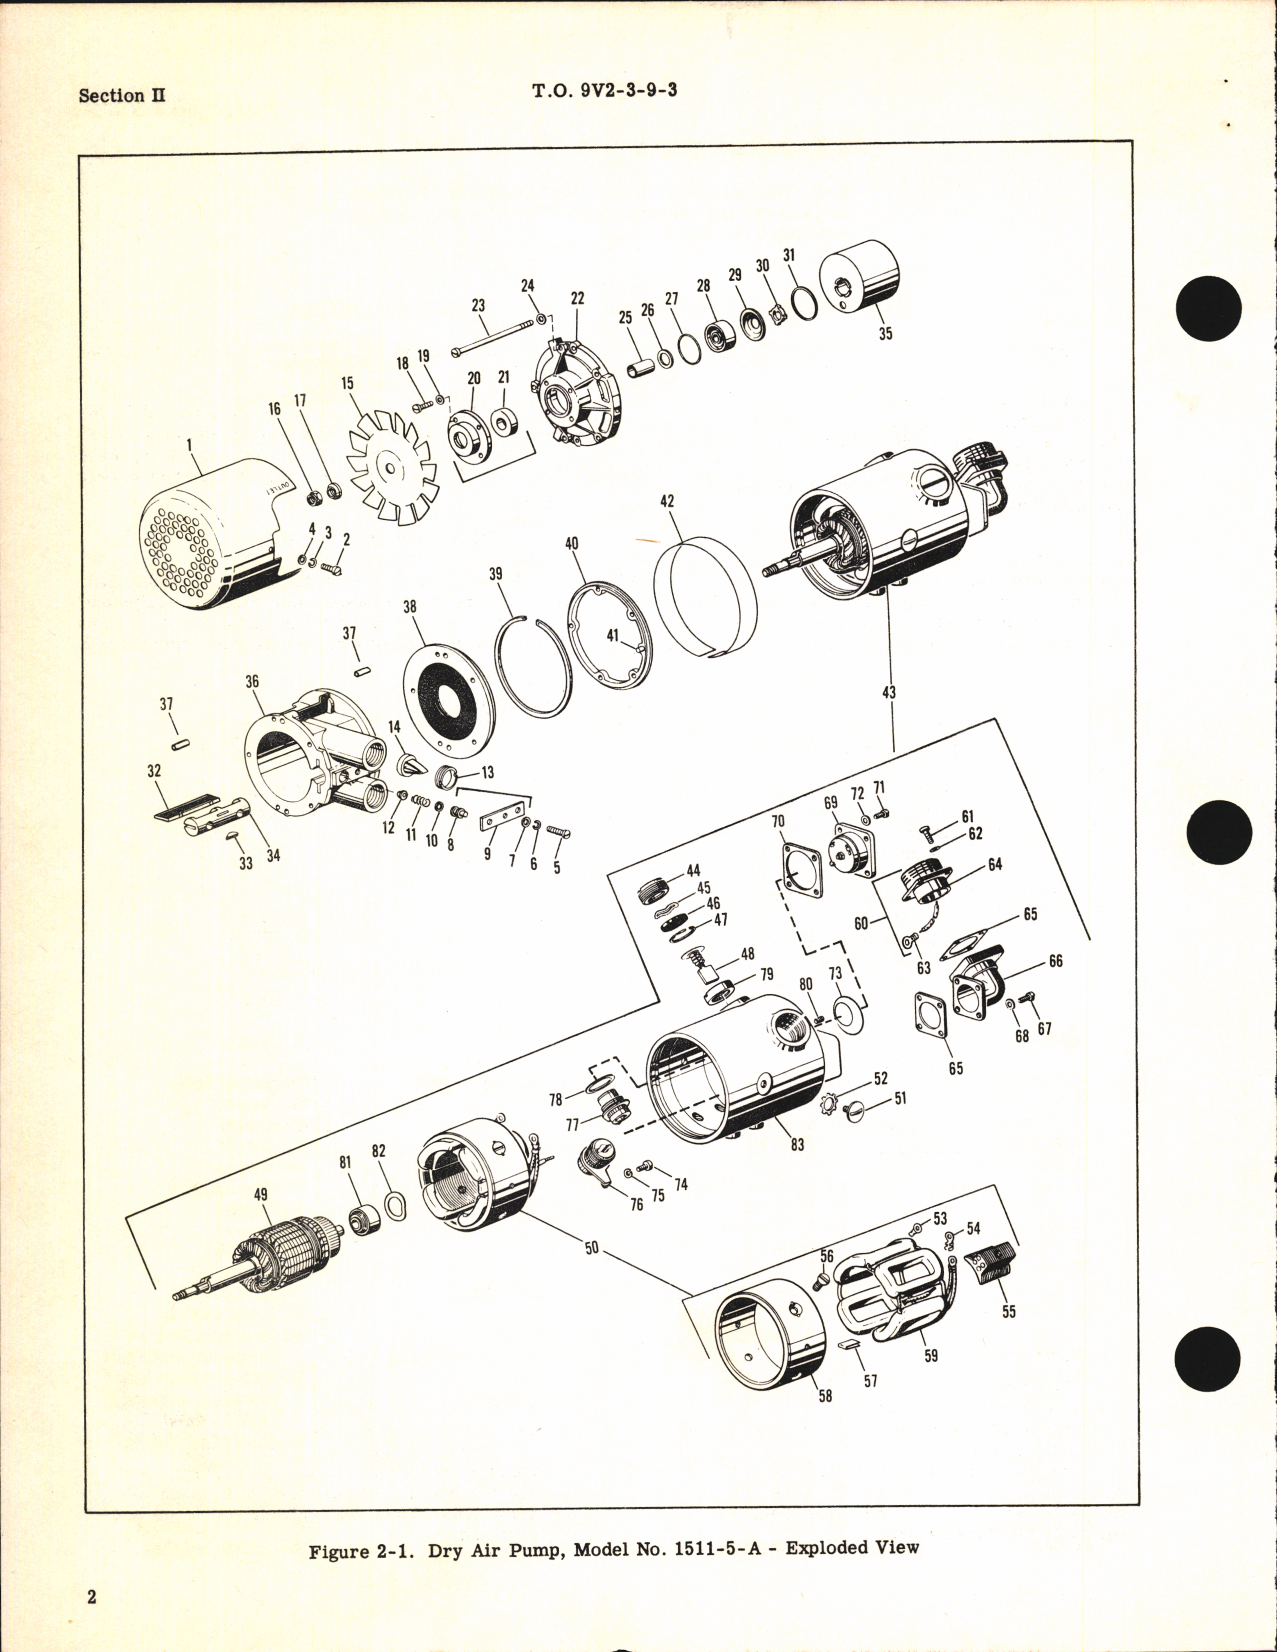 Sample page 6 from AirCorps Library document: Handbook of Overhaul Instructions for Dry Air Pump Model No. 1511-5-A